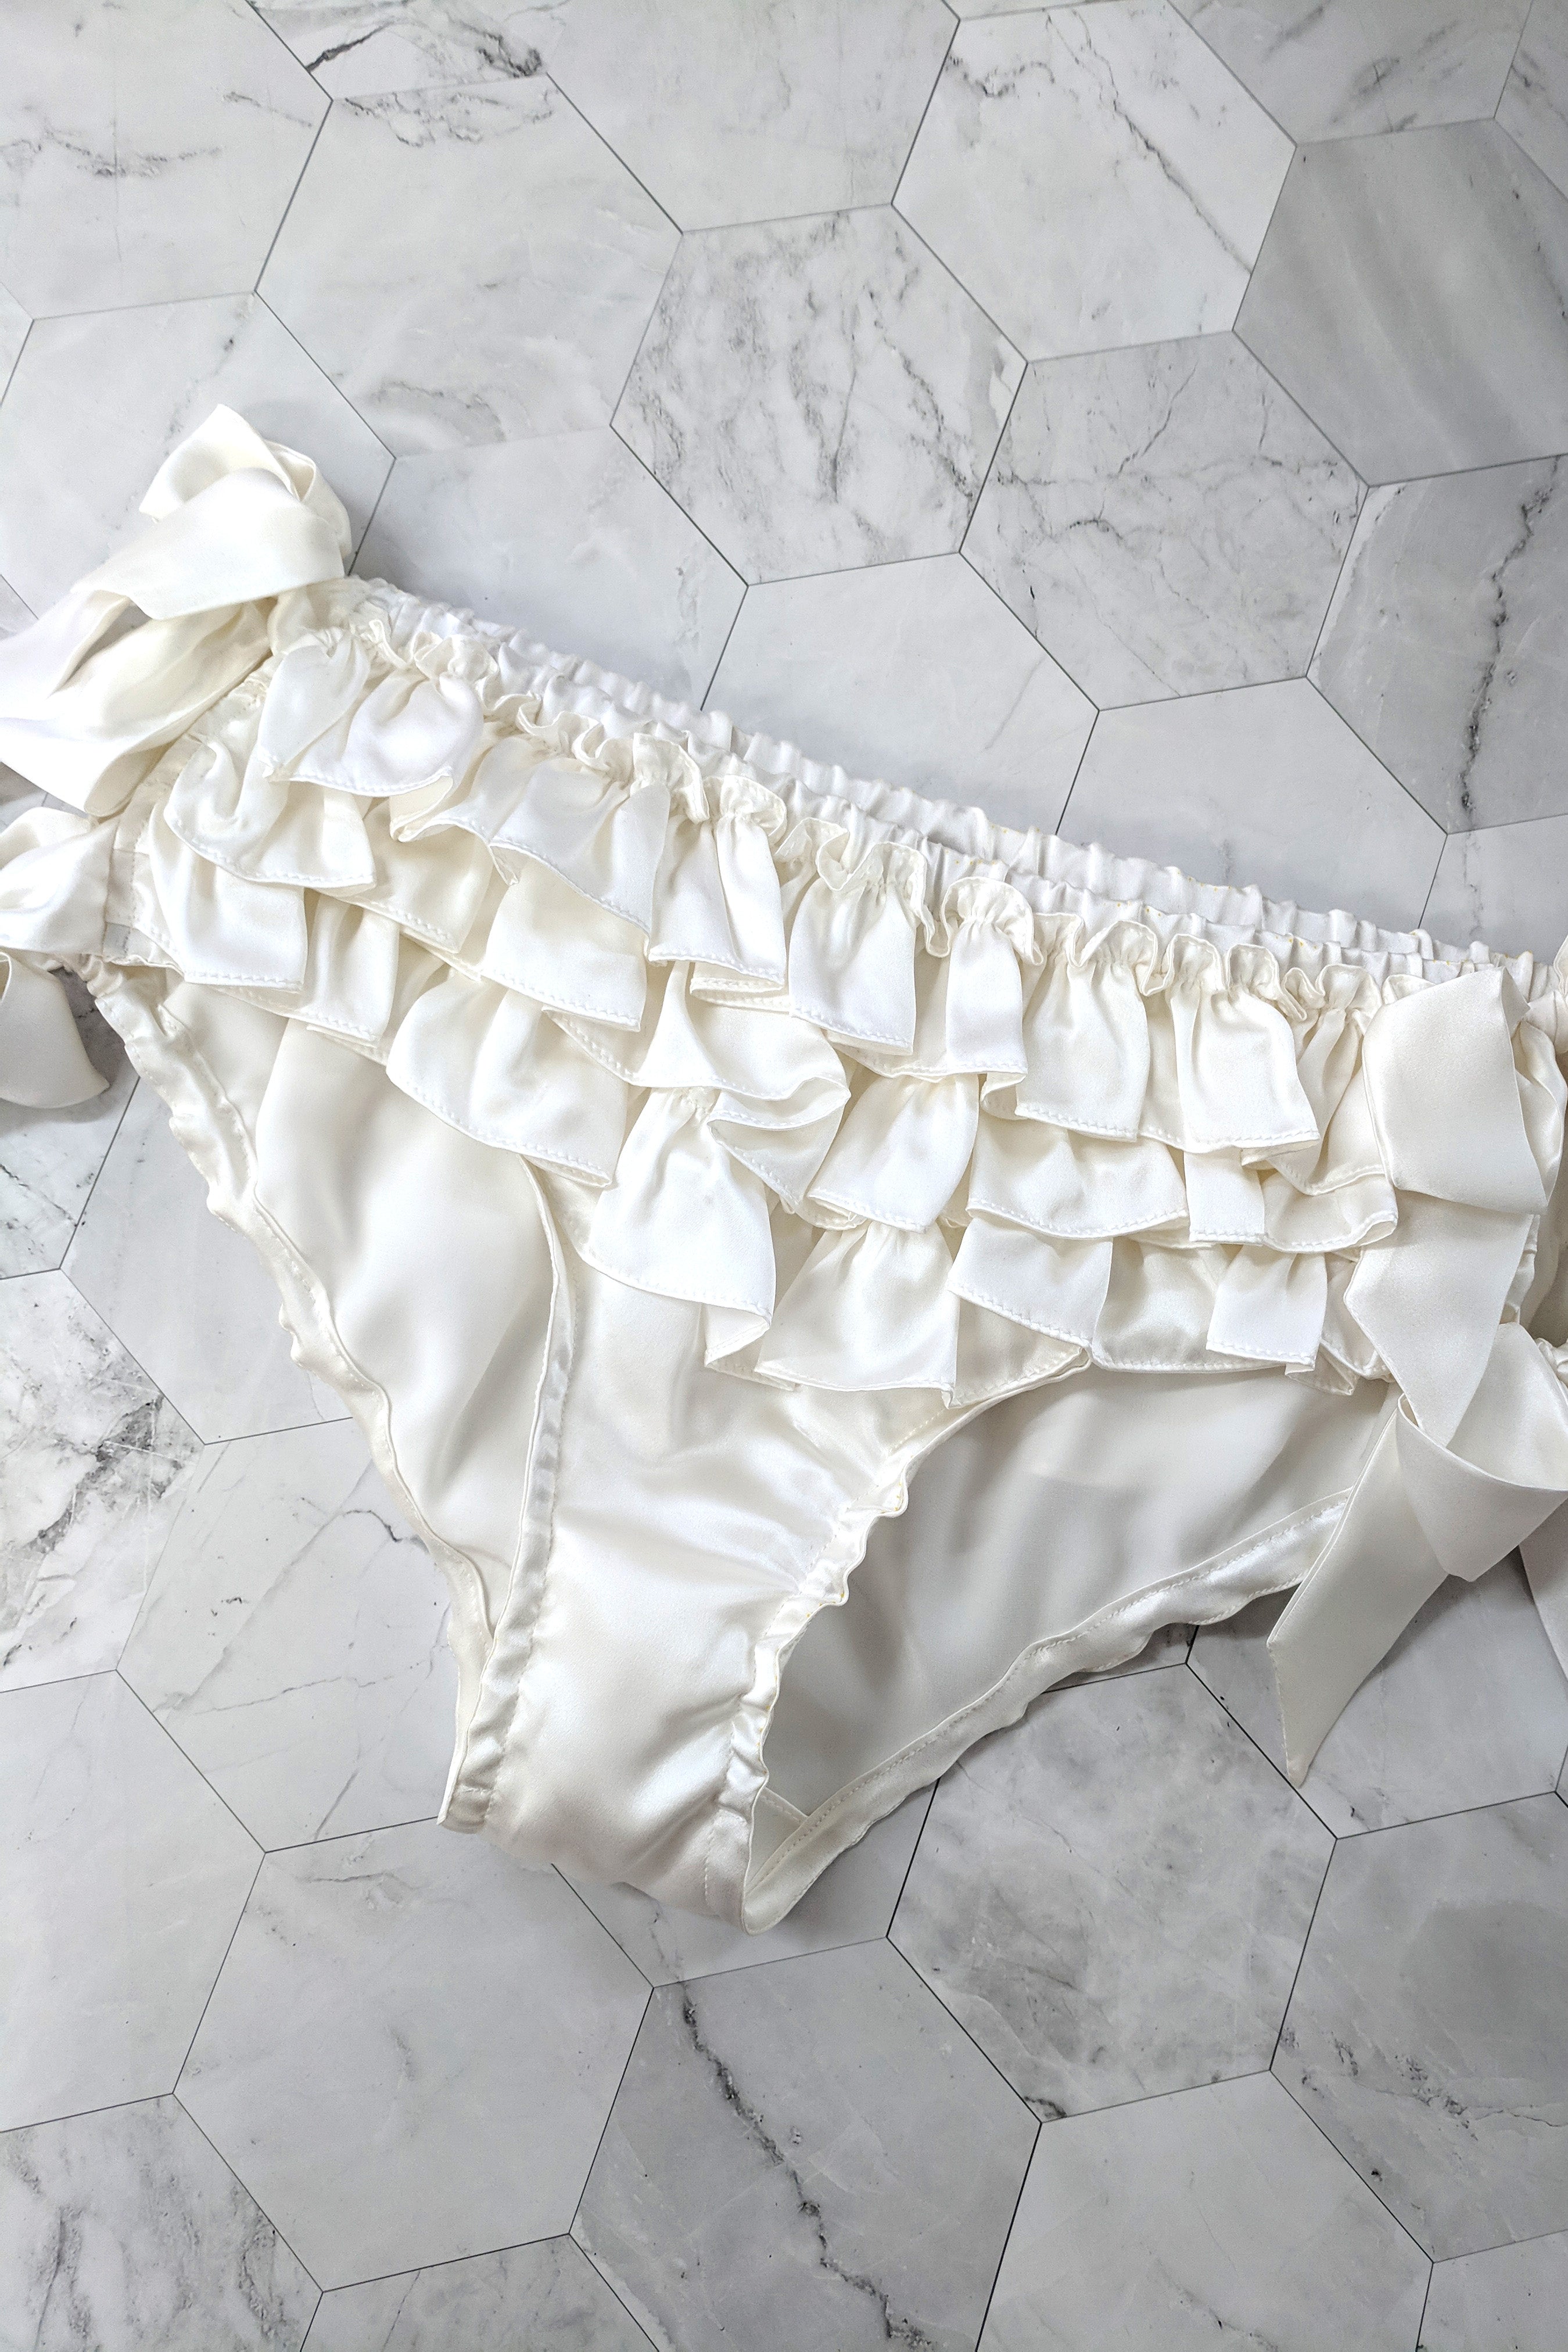 Retro style ruffled knickers in white 100% silk satin with bows